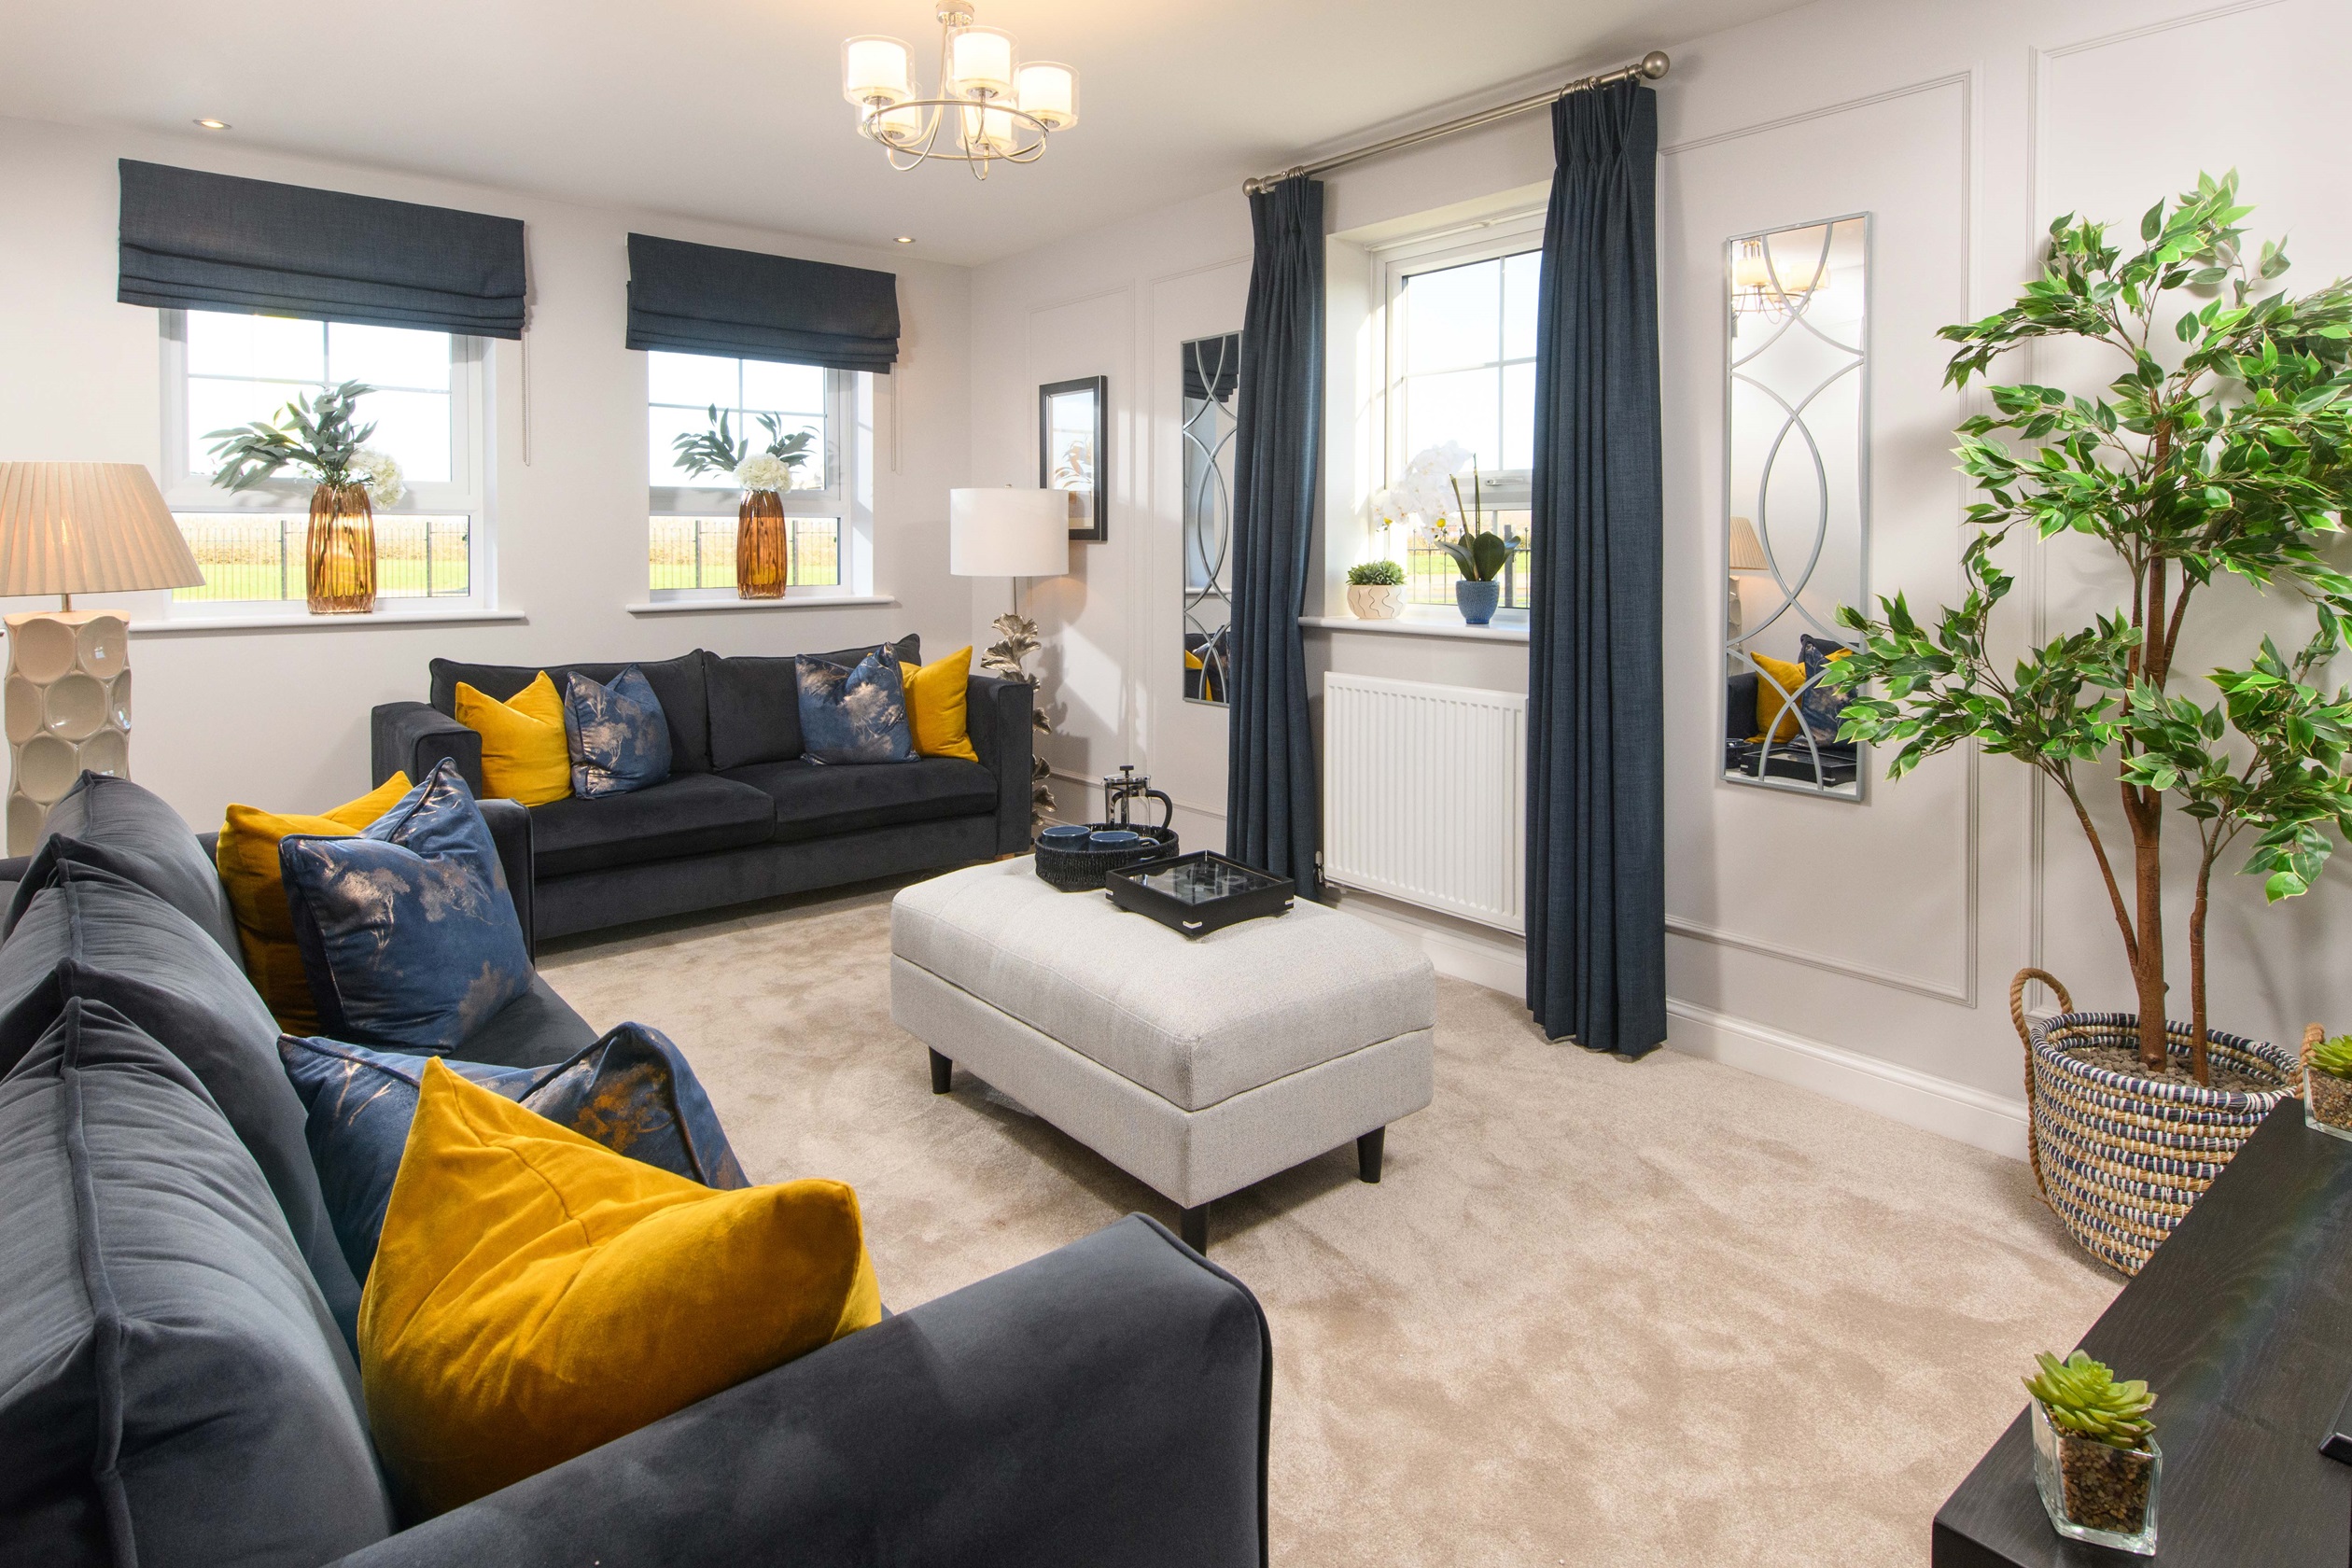 Property 3 of 10. Hesketh Show Home